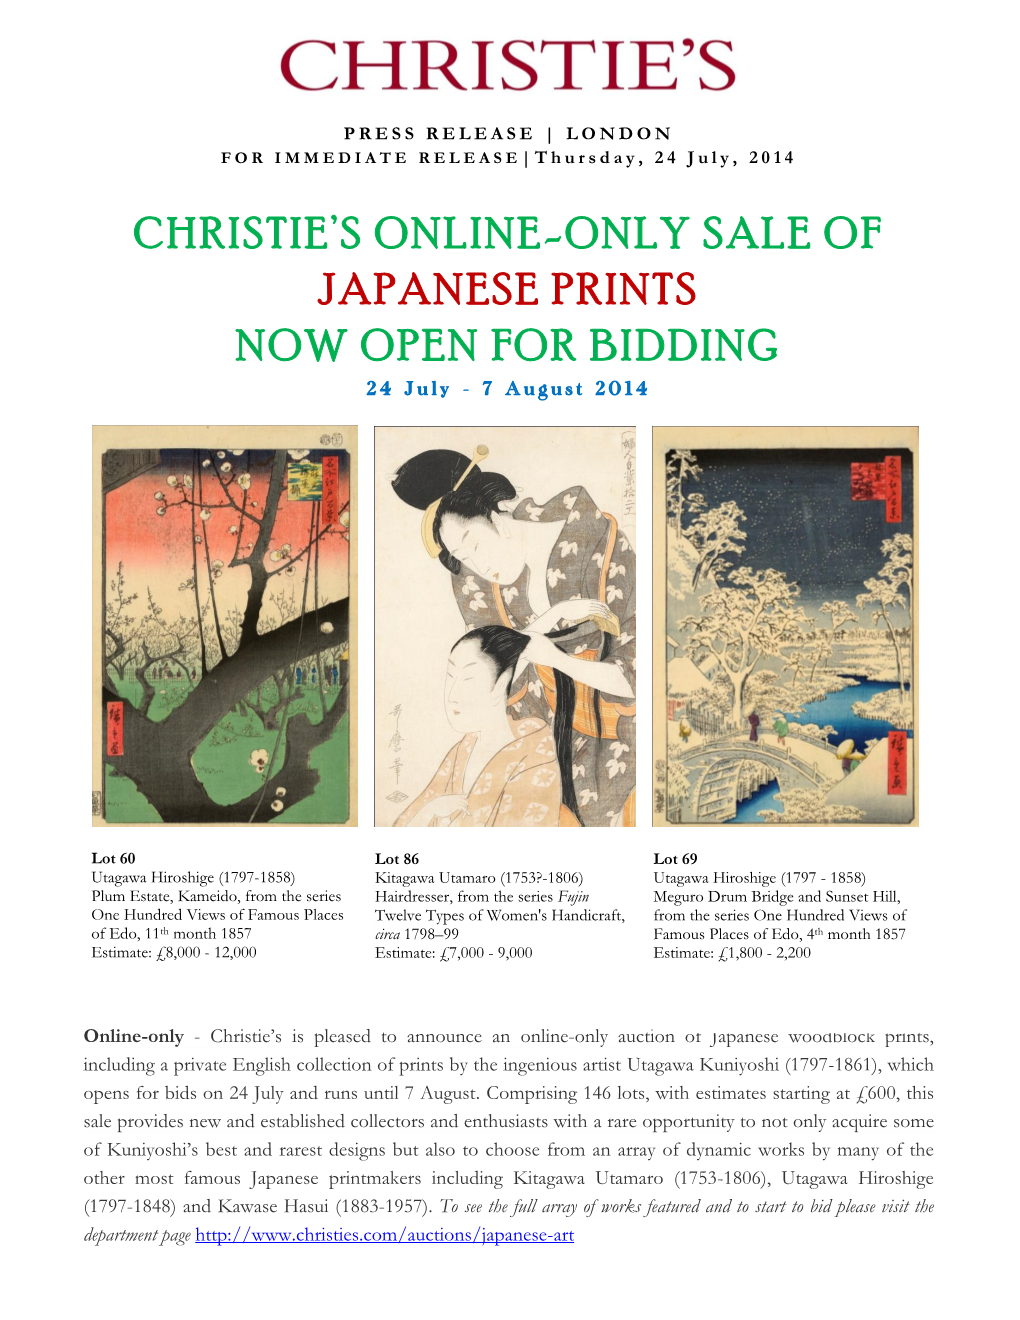 Christie's Online-Only Sale of Japanese Prints Now Open